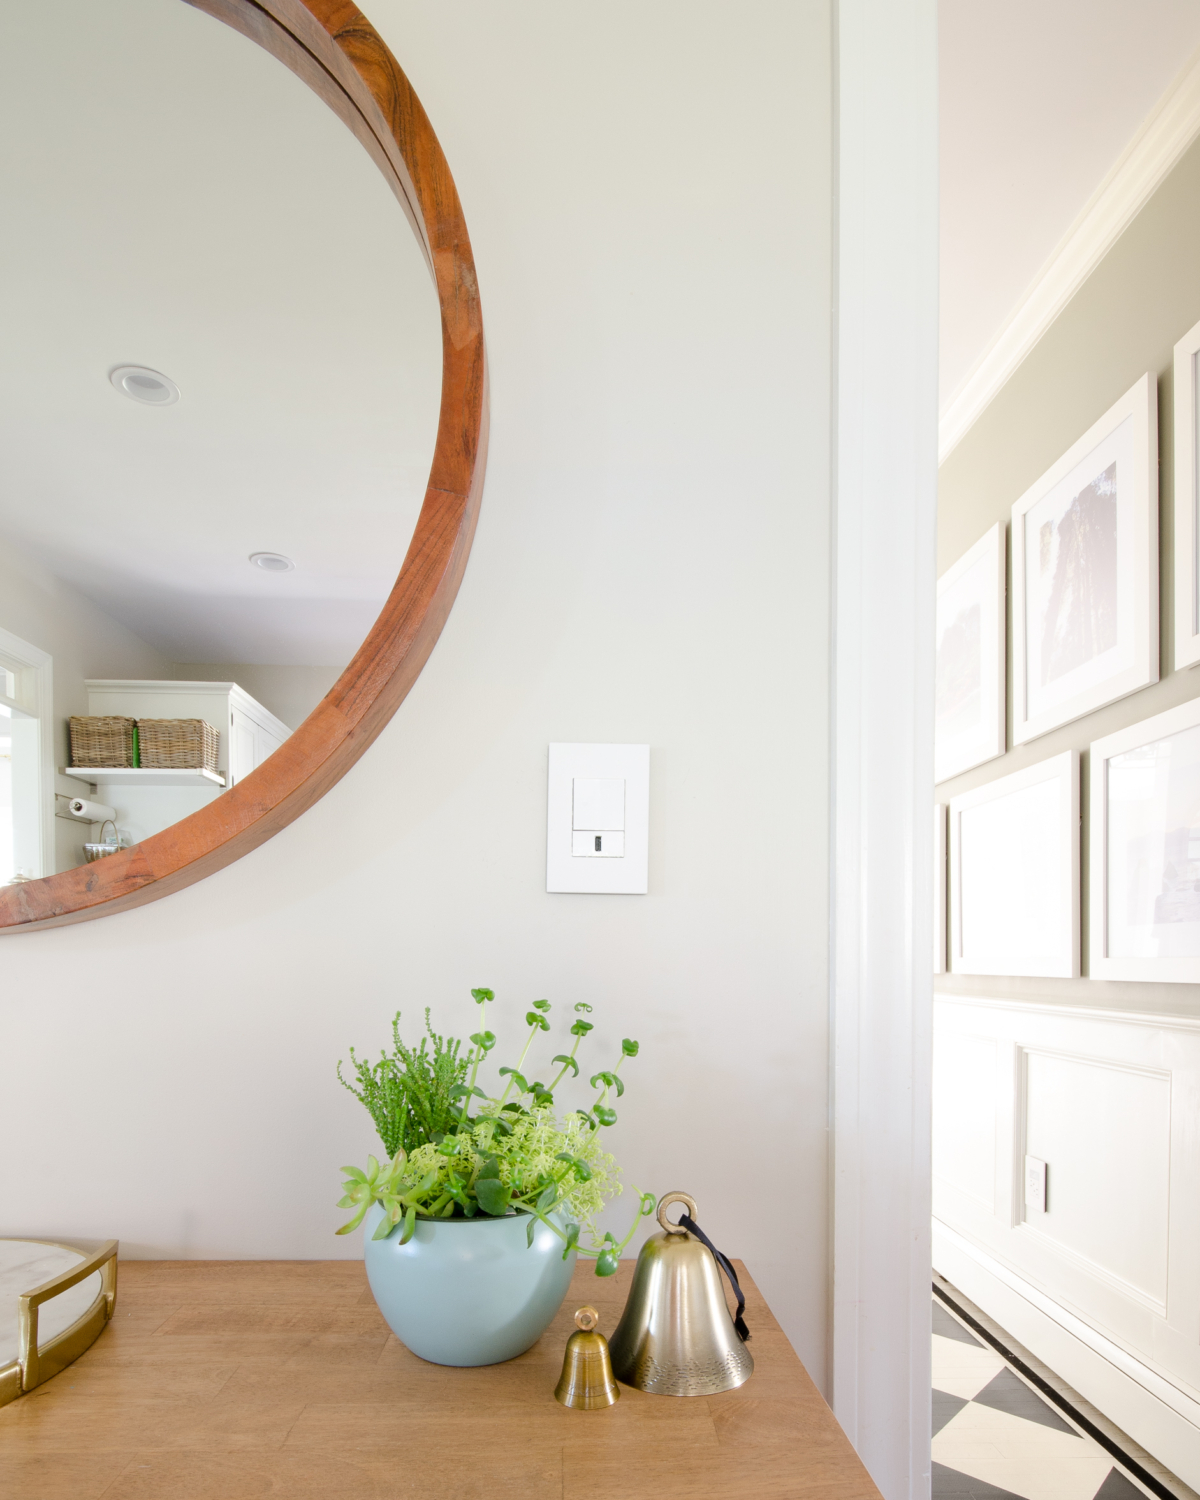 How to update light switches and outlets for a fresh look. Includes a video tutorial!